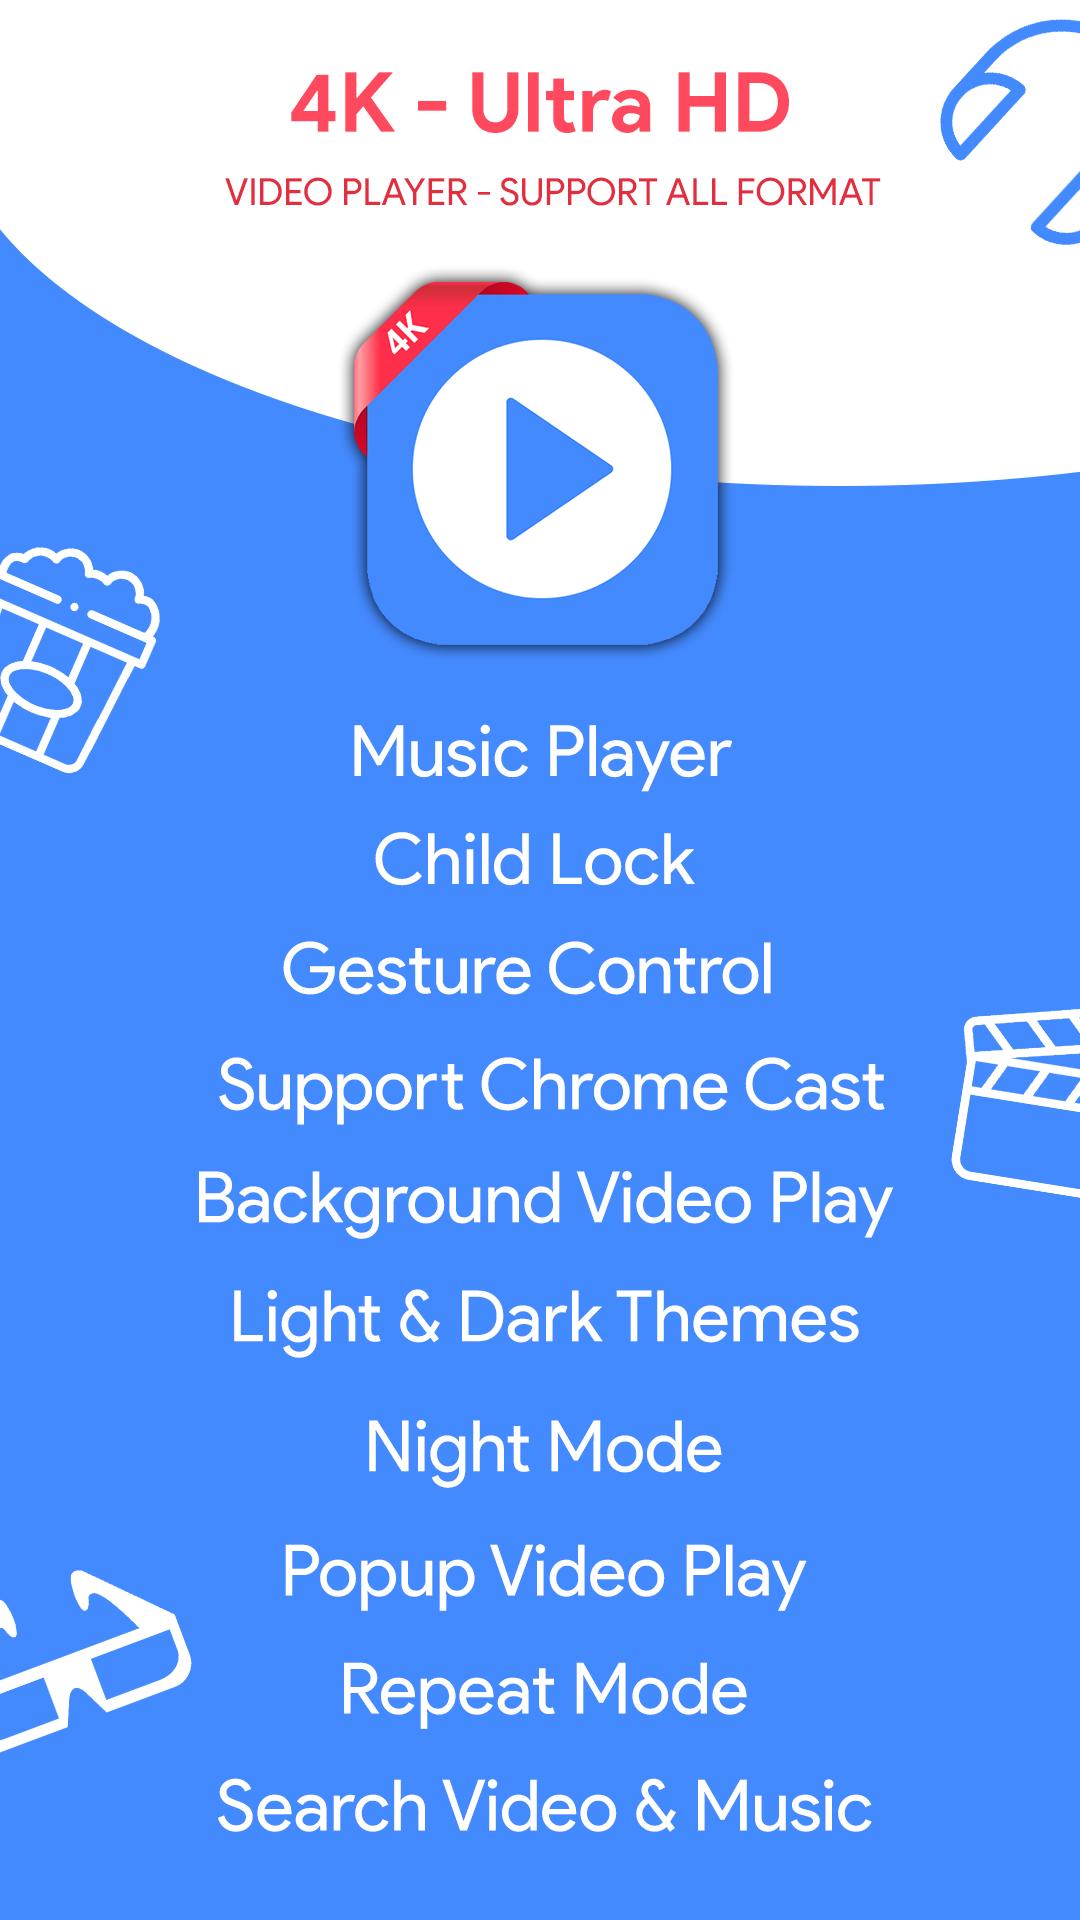 4K Video Player All Format - Support for Android Download